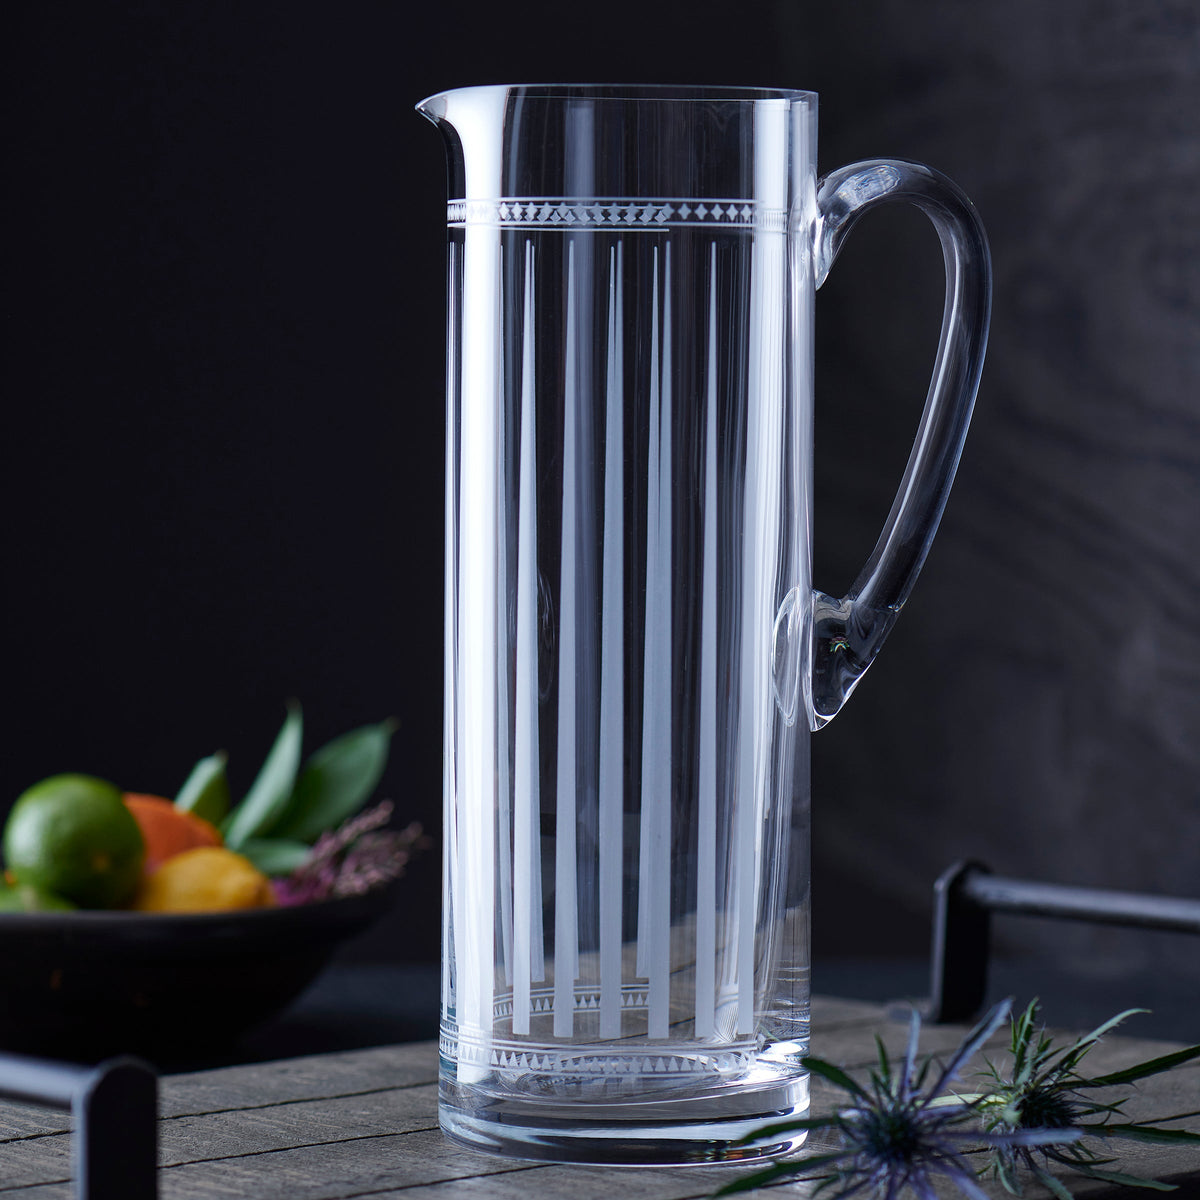 A Marrakech Tall Pitcher by Caskata Artisanal Home with graphic patterns sitting on a table next to some fruit.